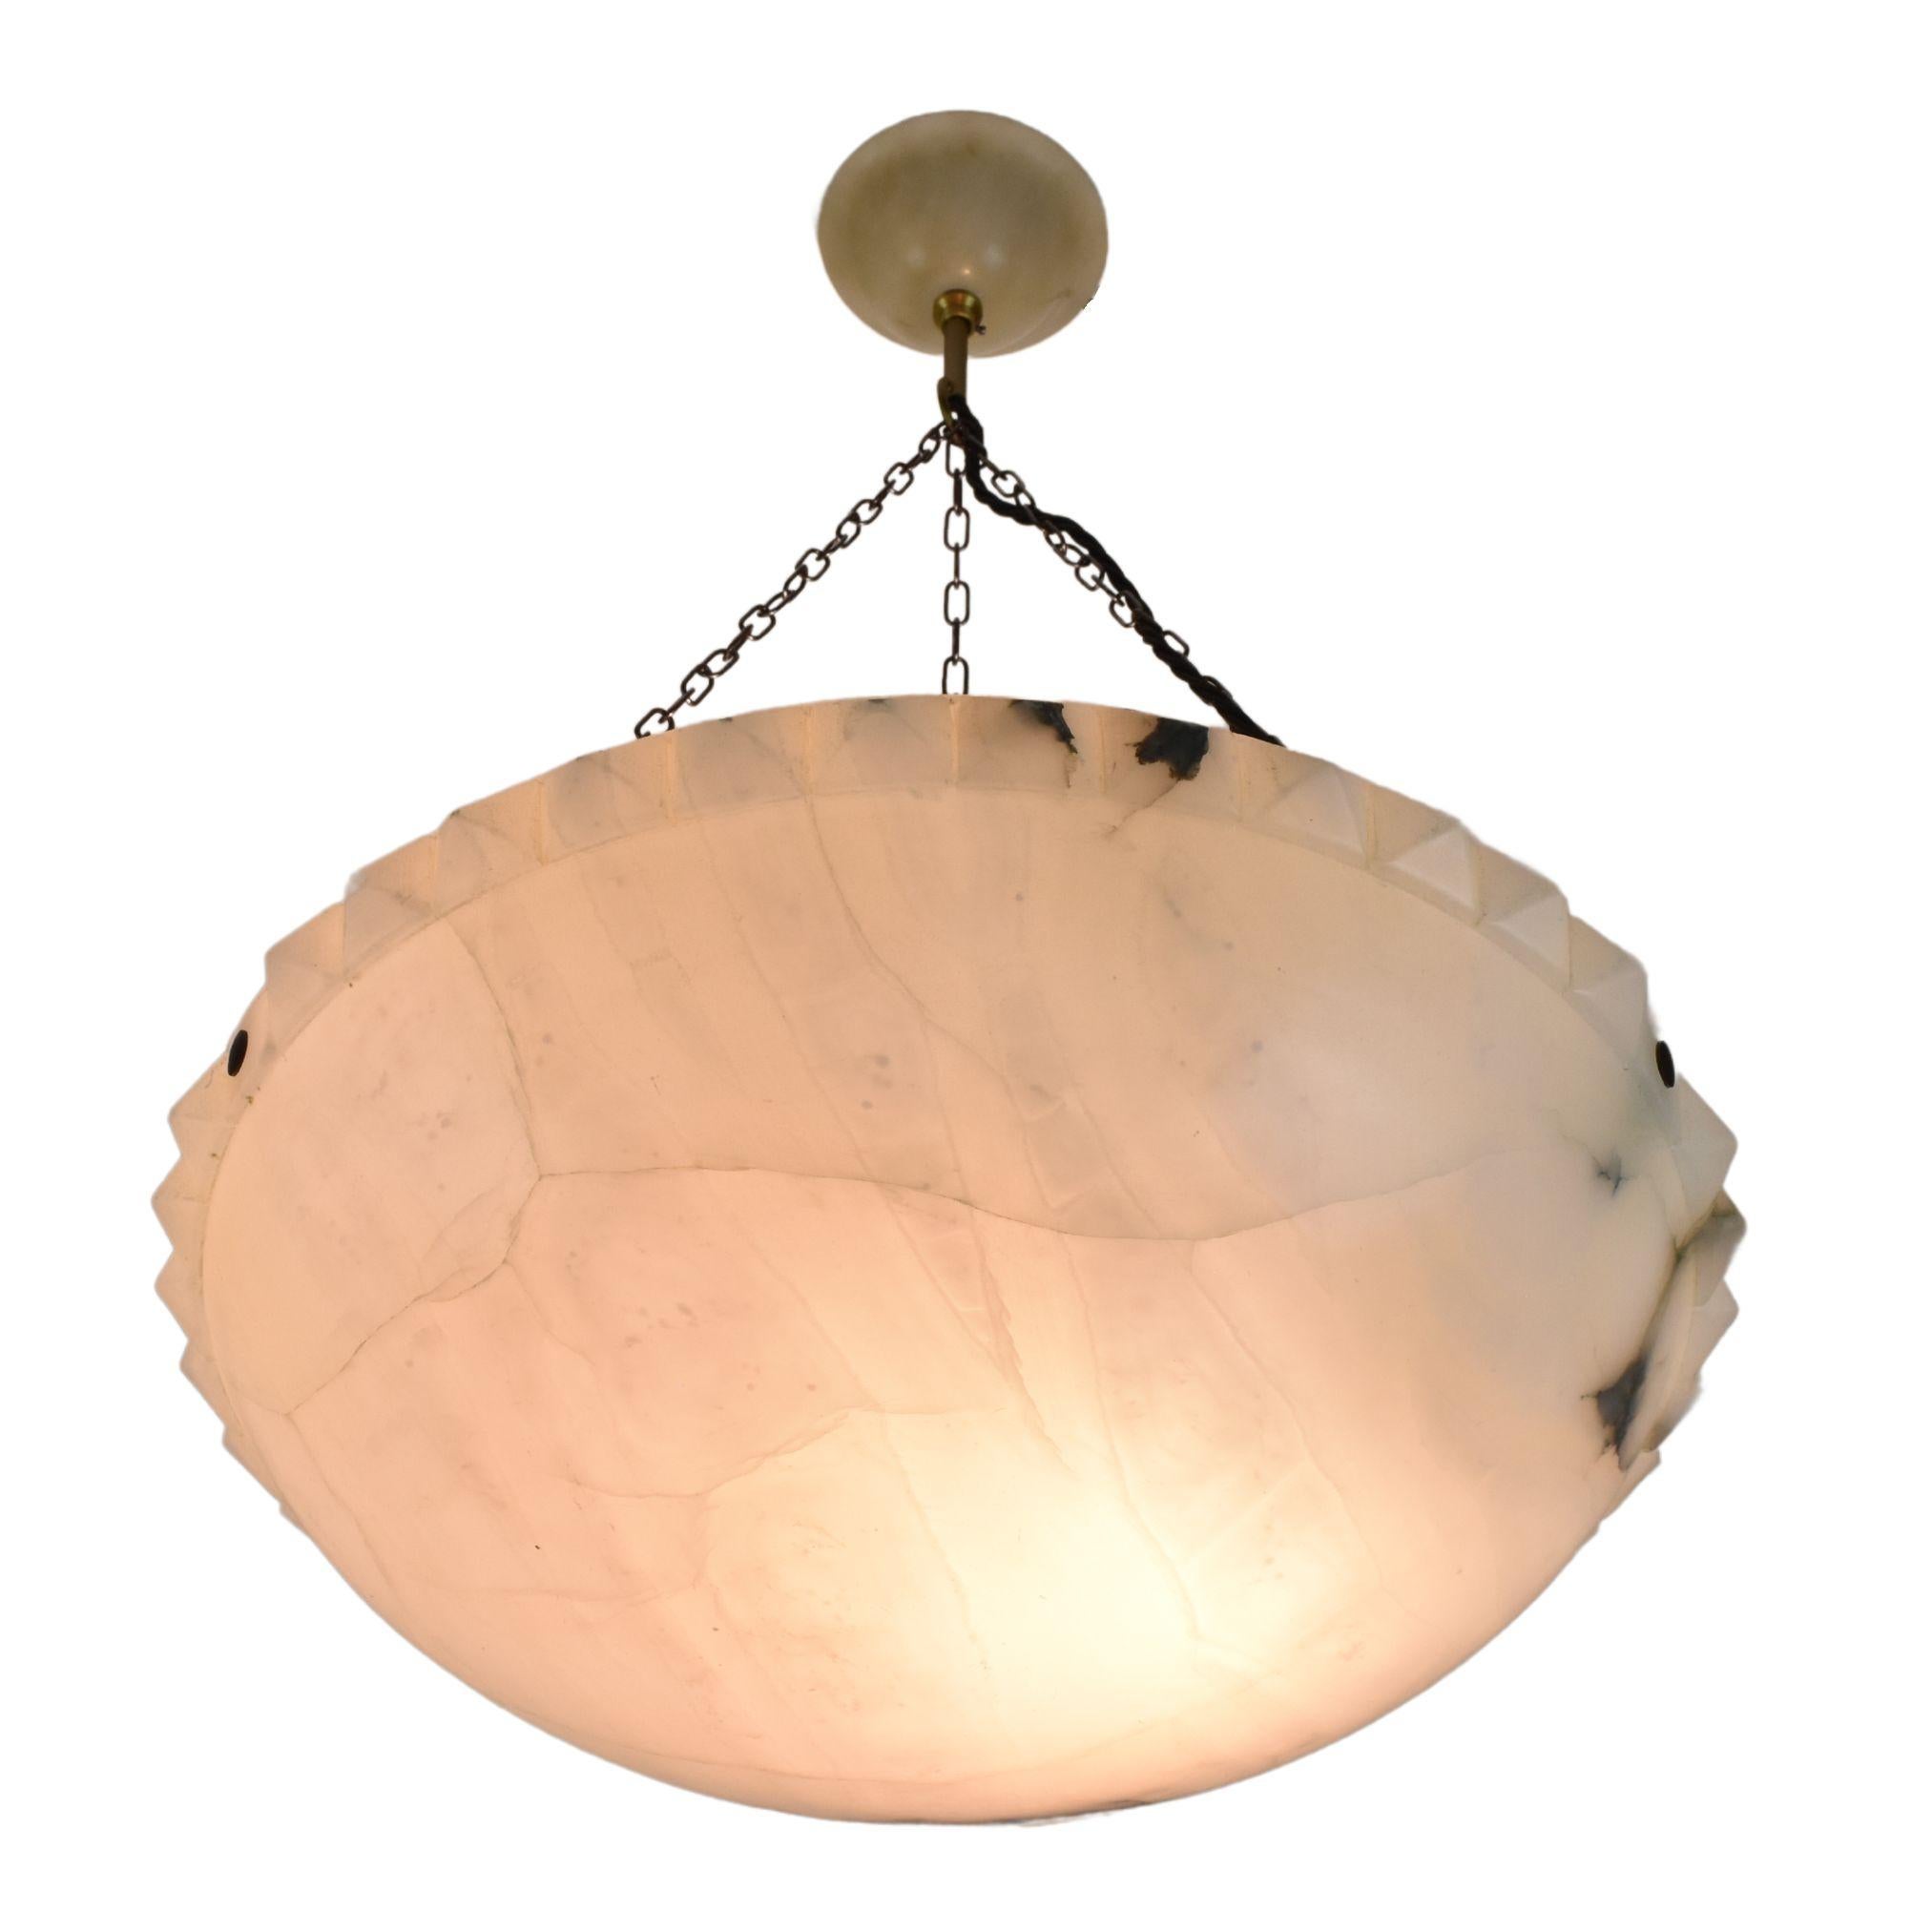 French Large Hobnailed Art Deco Bright Alabaster Pendant Light Ceiling Fixture Lamp